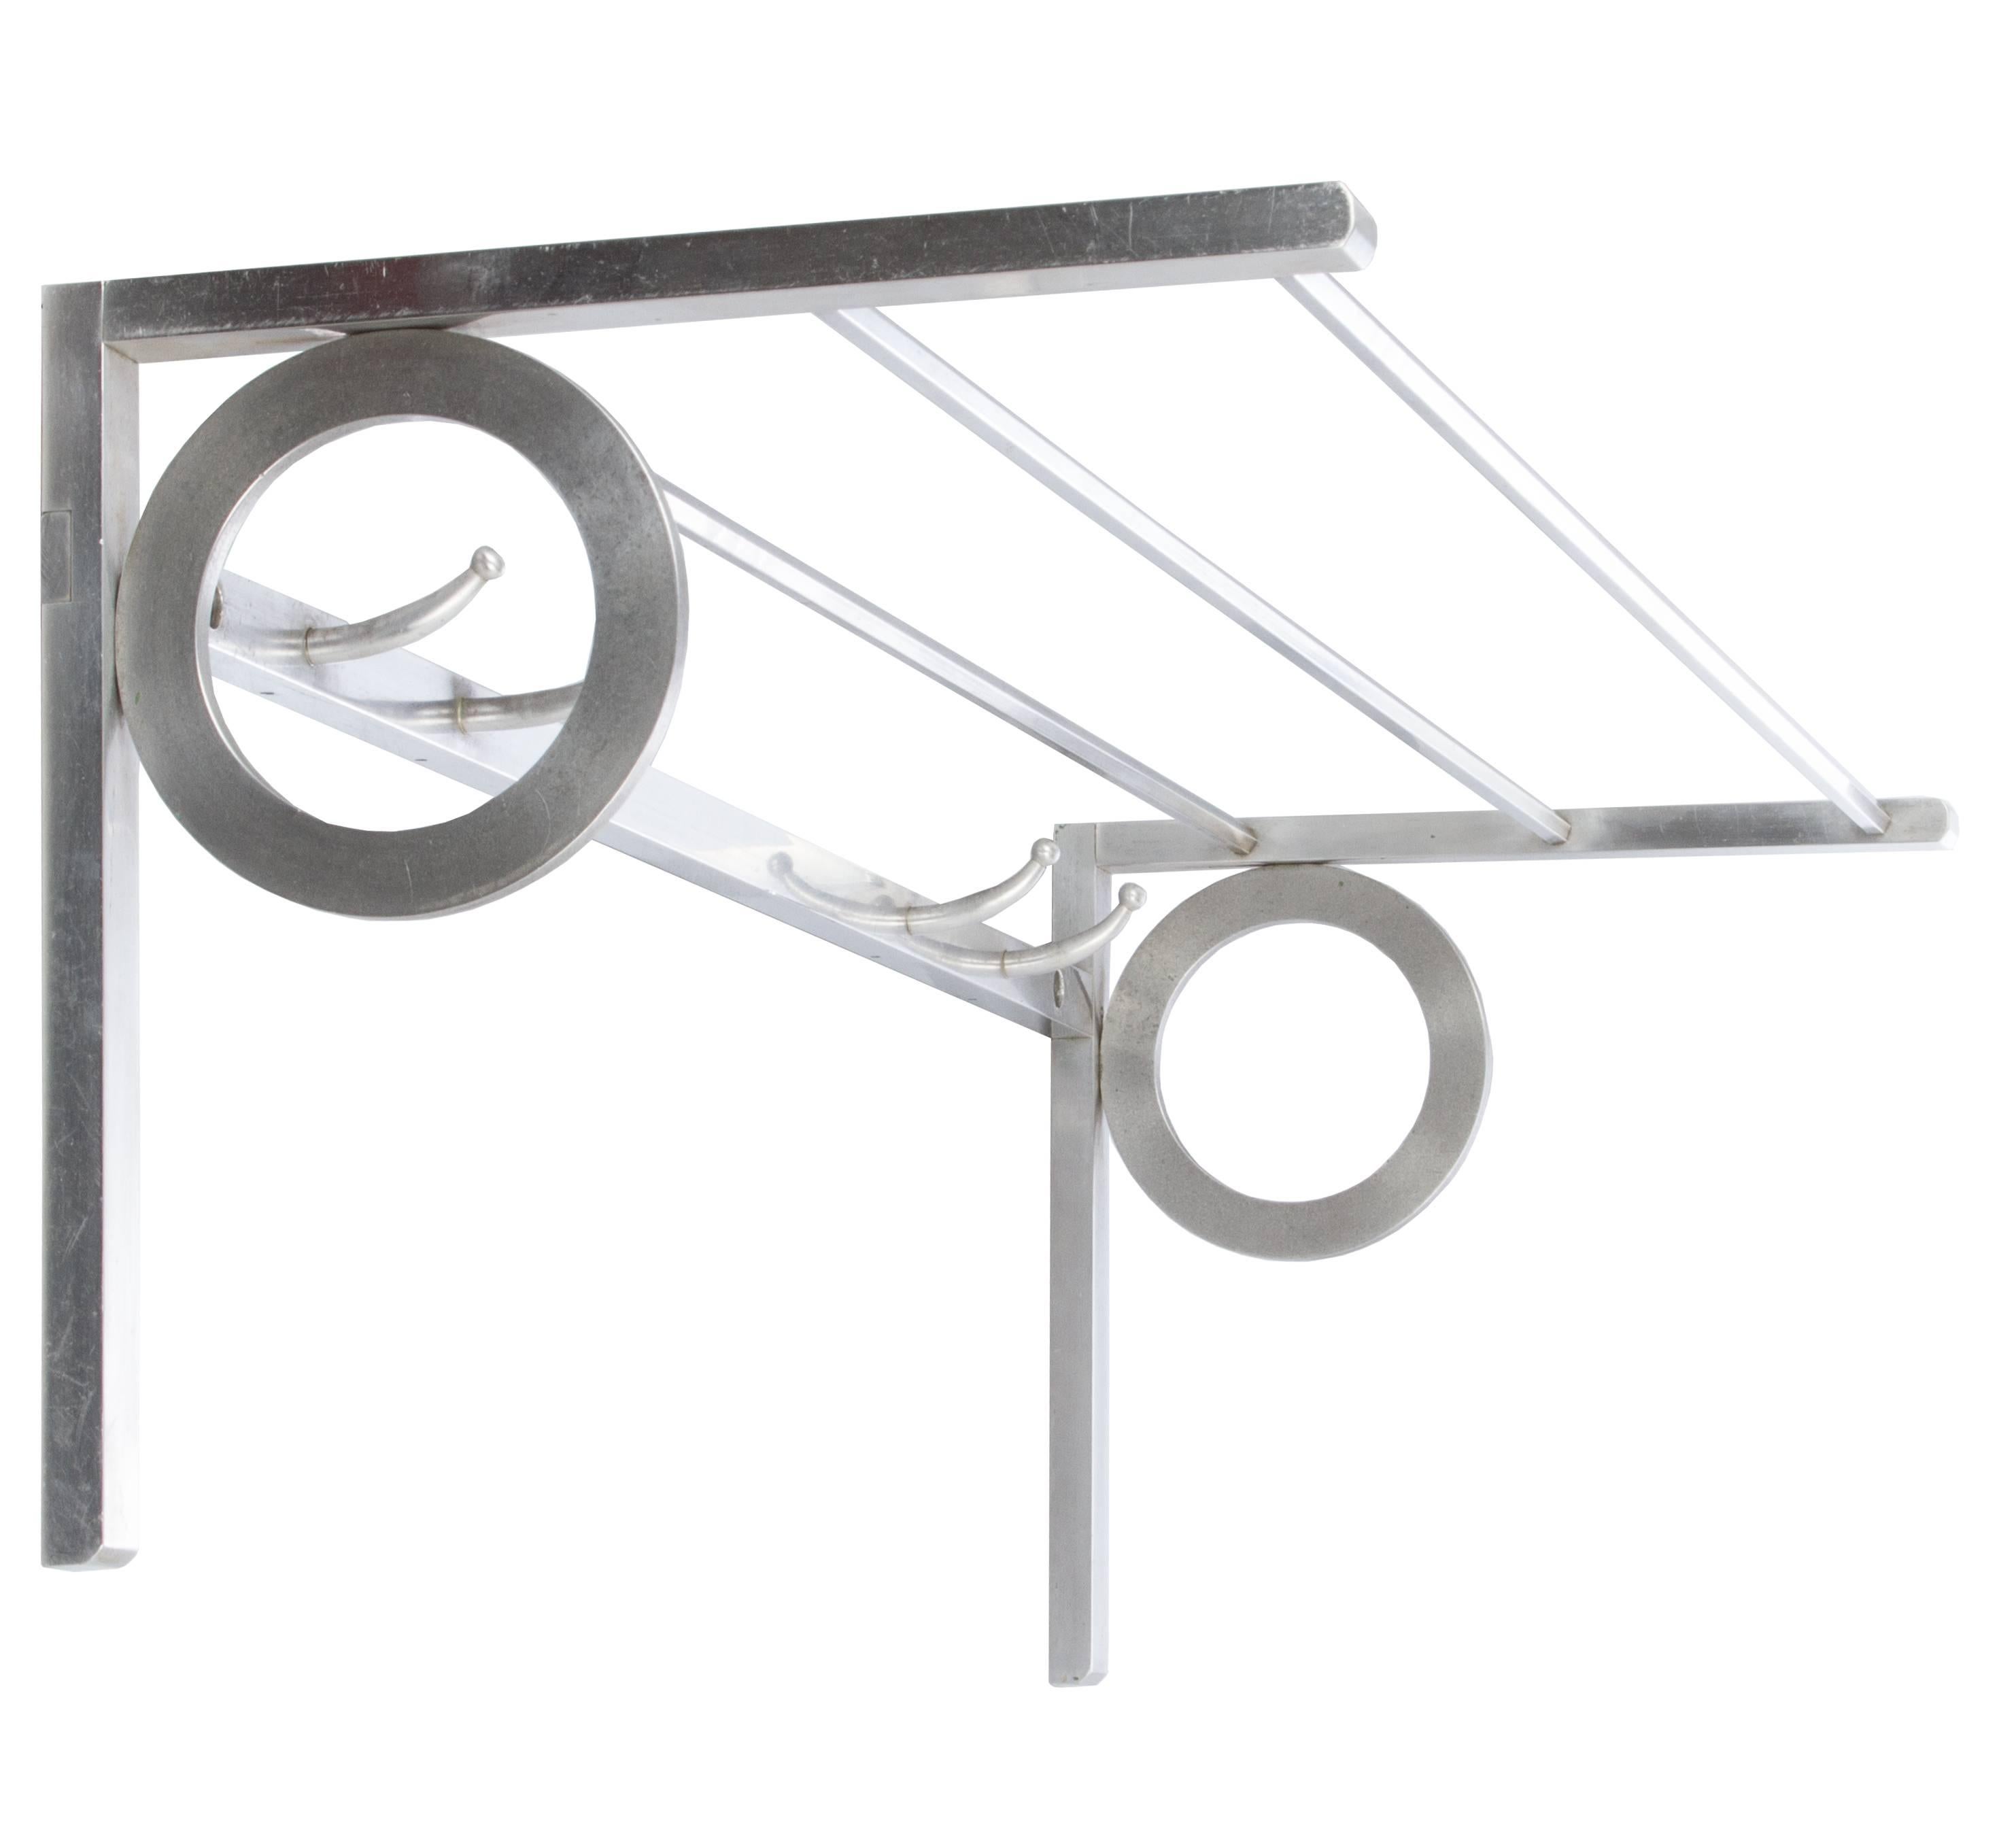 This is a great looking coat rack, very clean and modern in design.